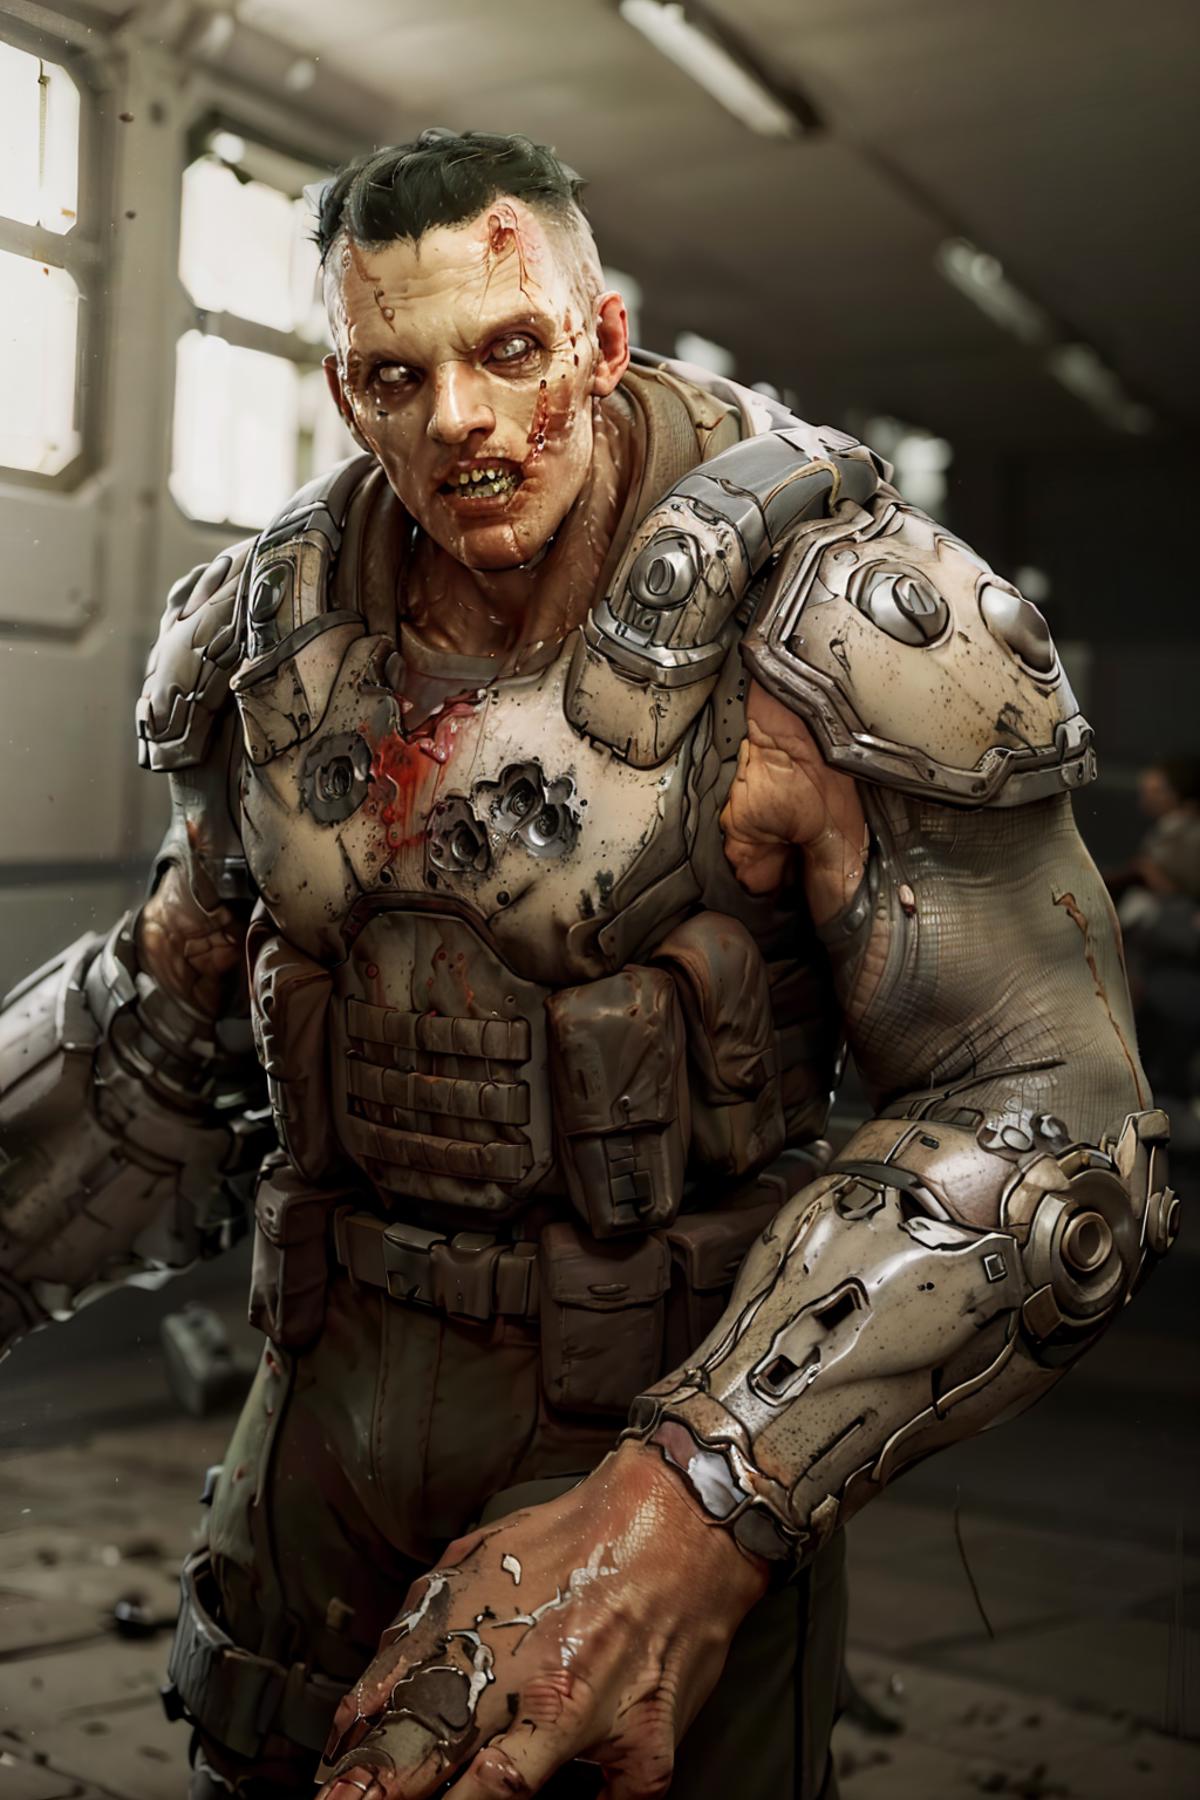 Zombie Soldier I DOOM image by Darknoice